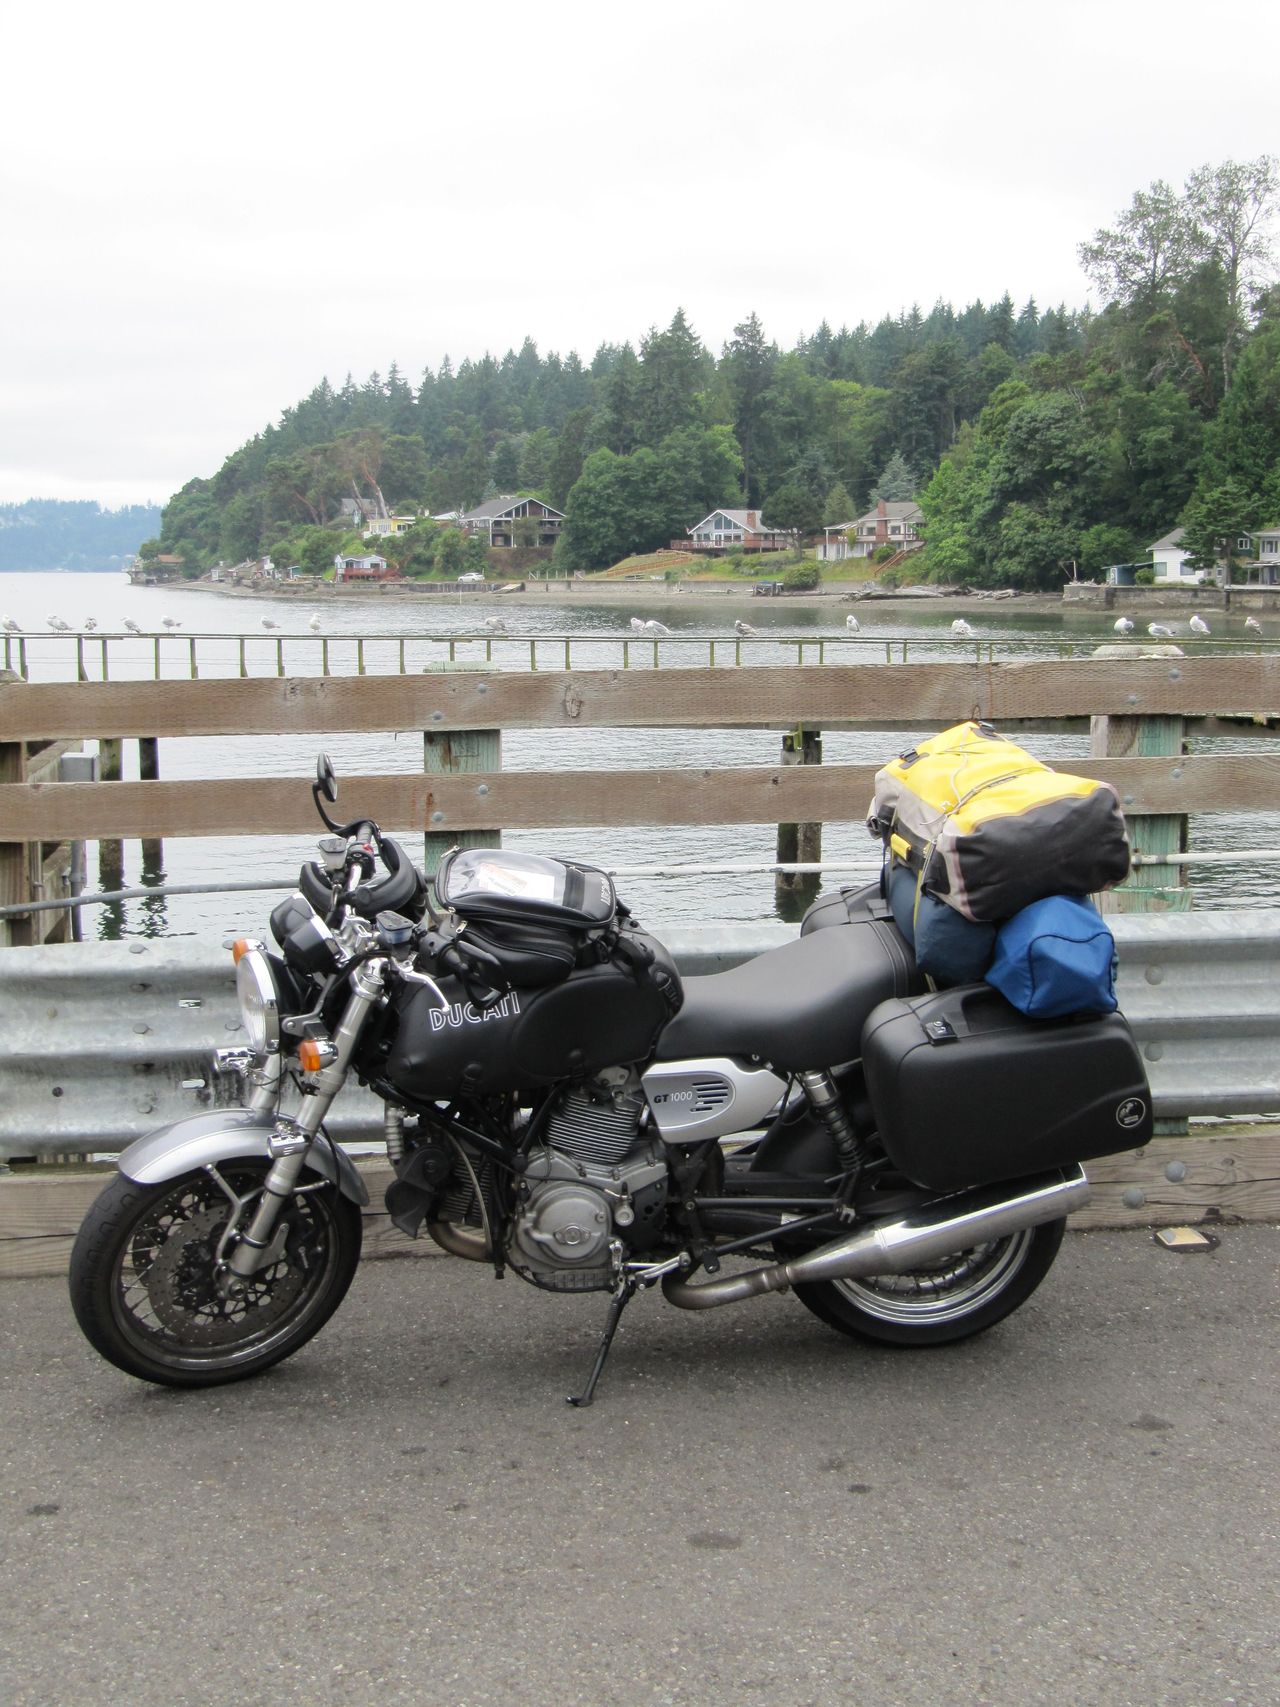 Waiting for the ferry at the start of a 3,000-mile tour